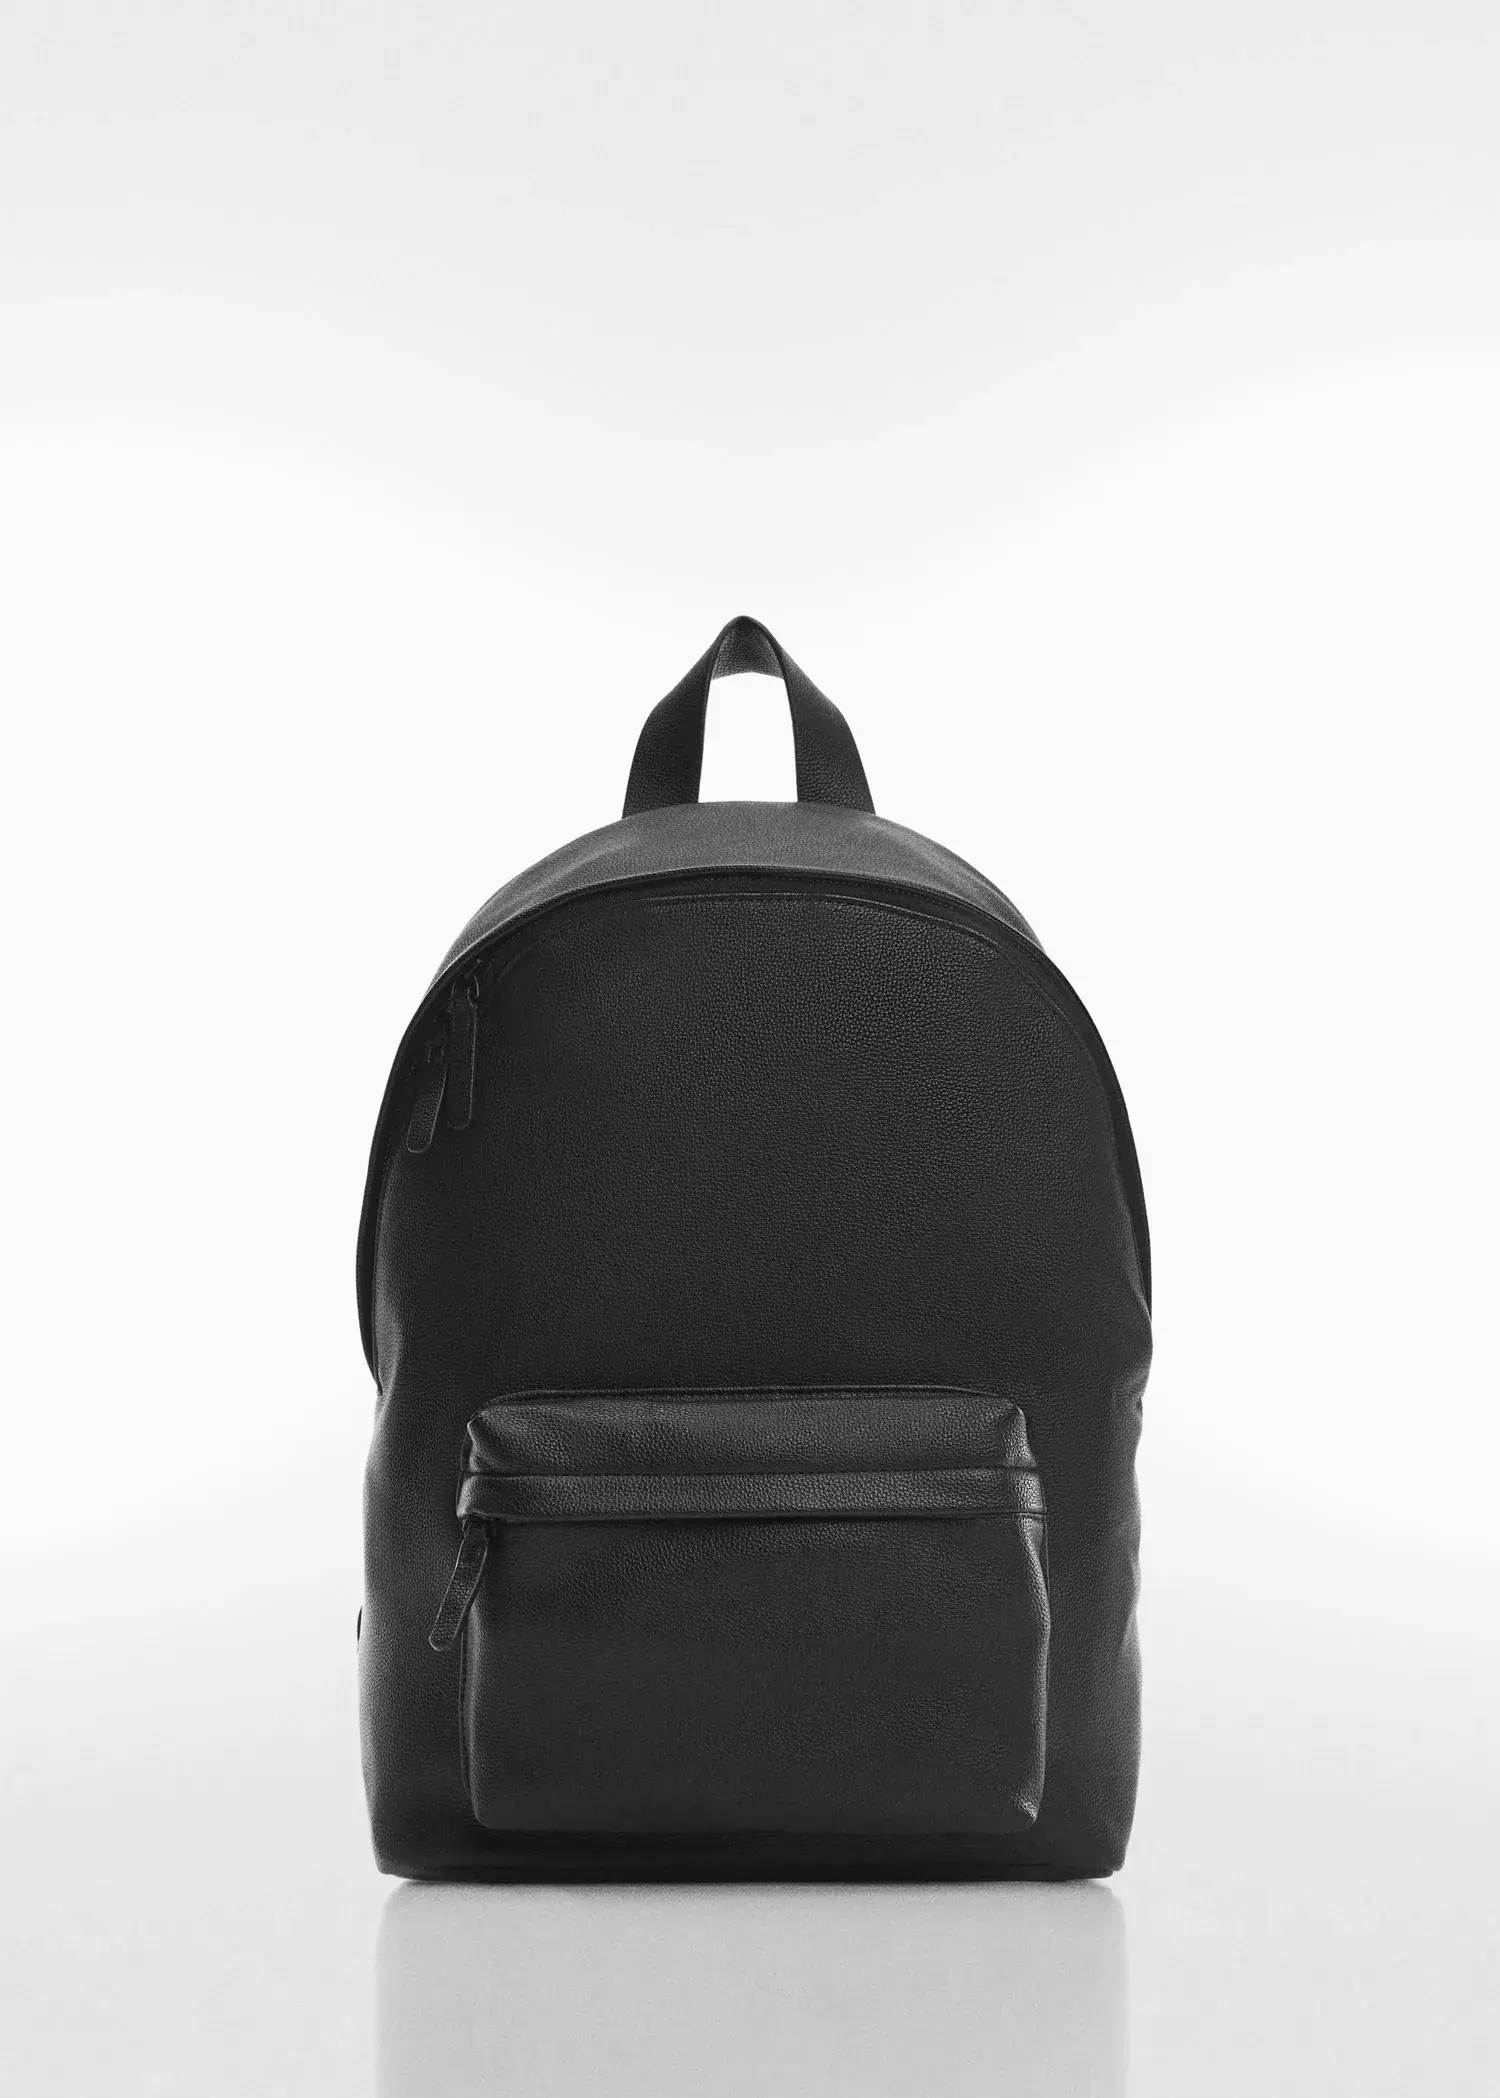 Mango Leather-effect backpack. a black backpack is shown against a white background. 